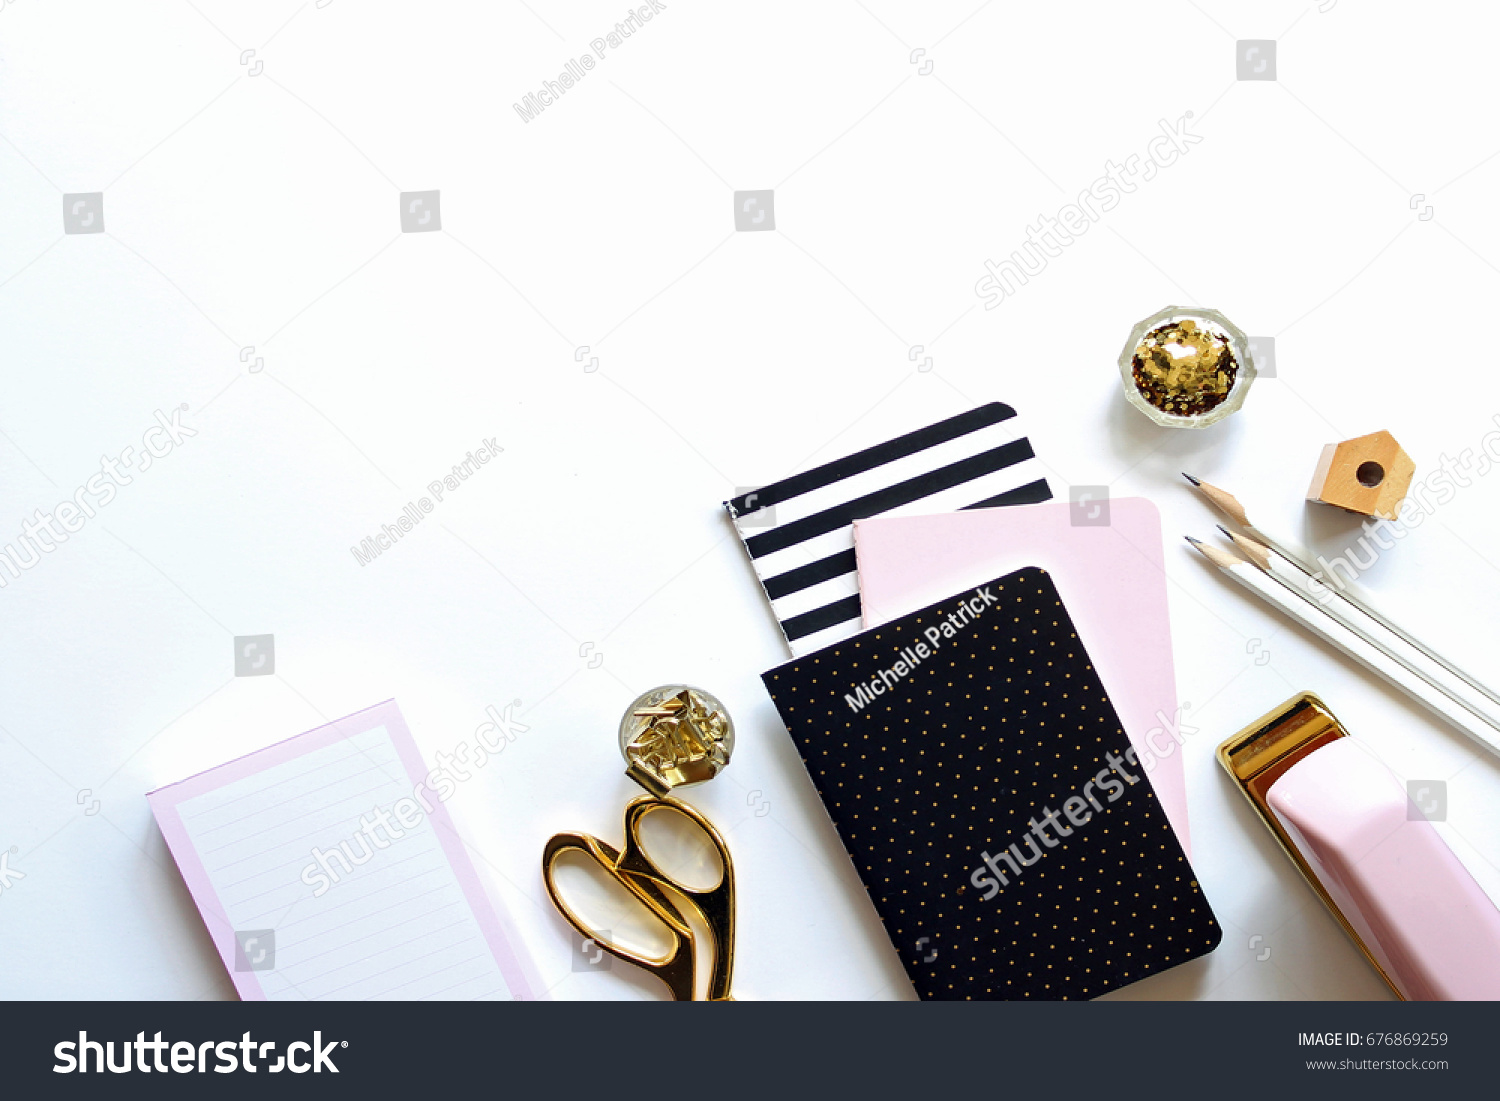 white and gold office supplies